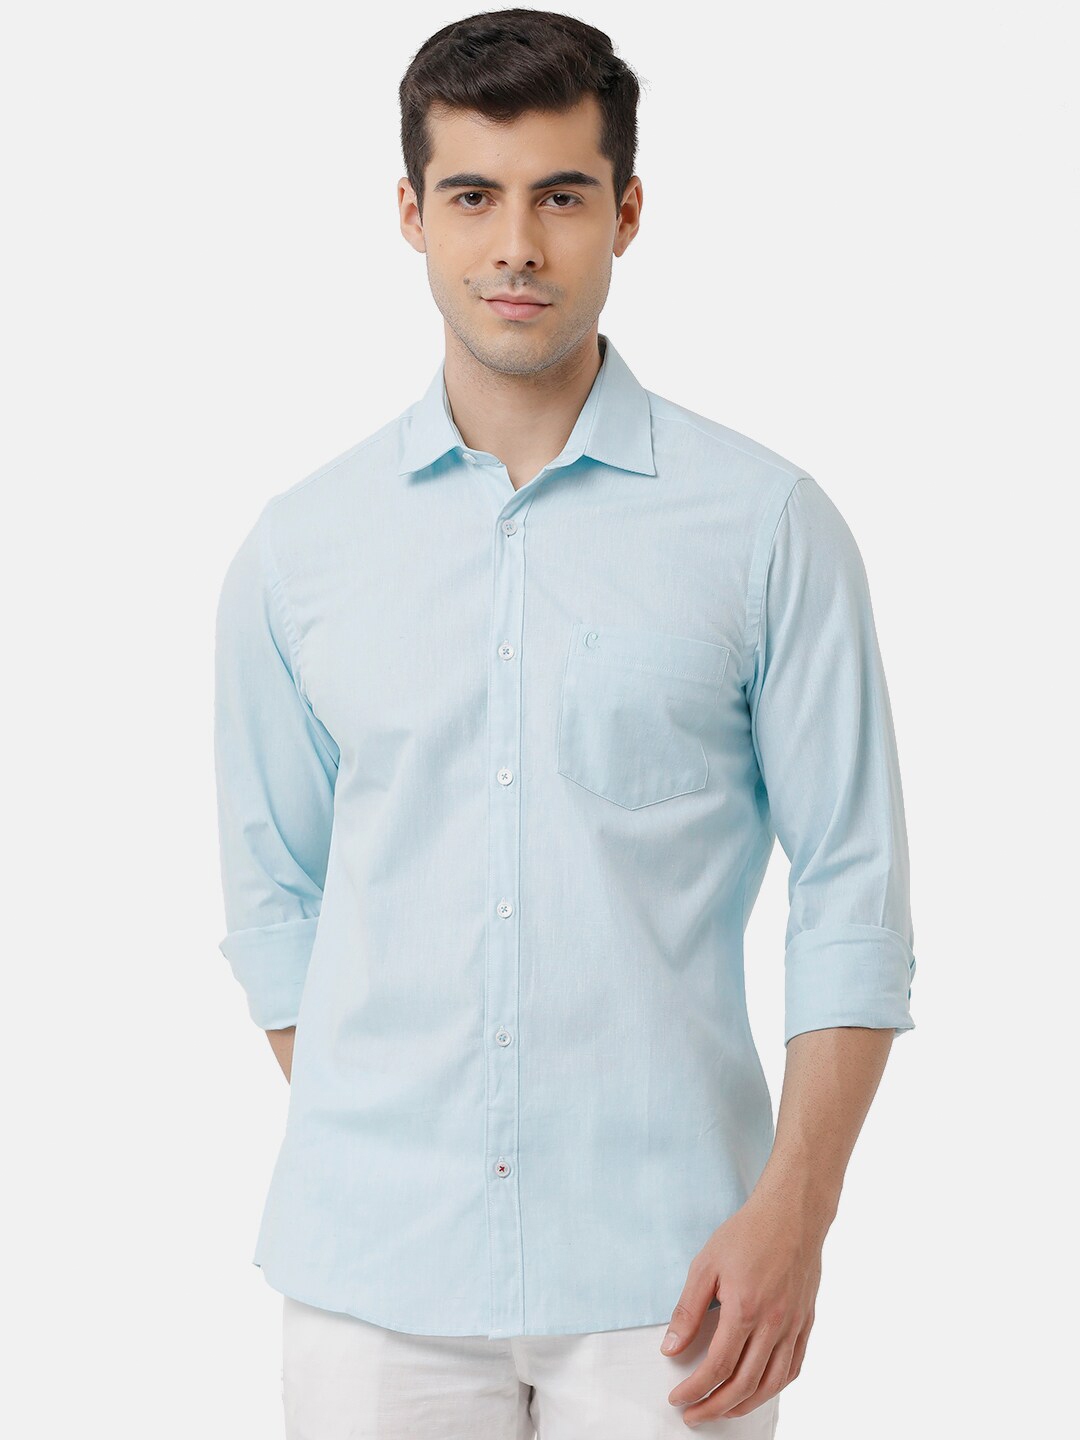 Buy CAVALLO By Linen Club Men Turquoise Blue Linen Cotton Solid Casual ...